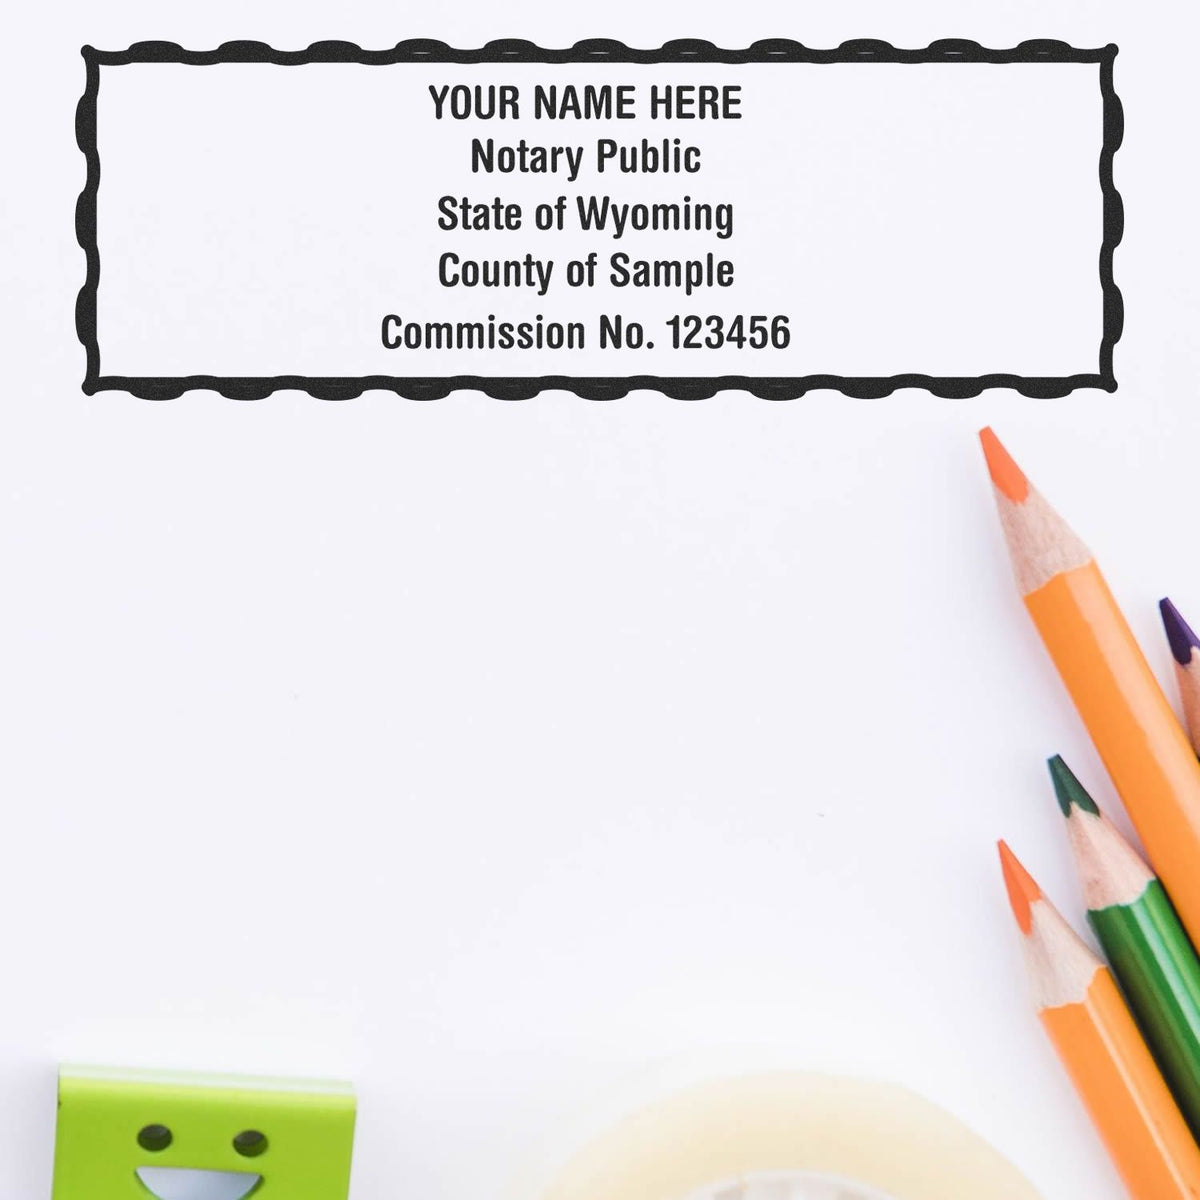 This paper is stamped with a sample imprint of the Super Slim Wyoming Notary Public Stamp, signifying its quality and reliability.